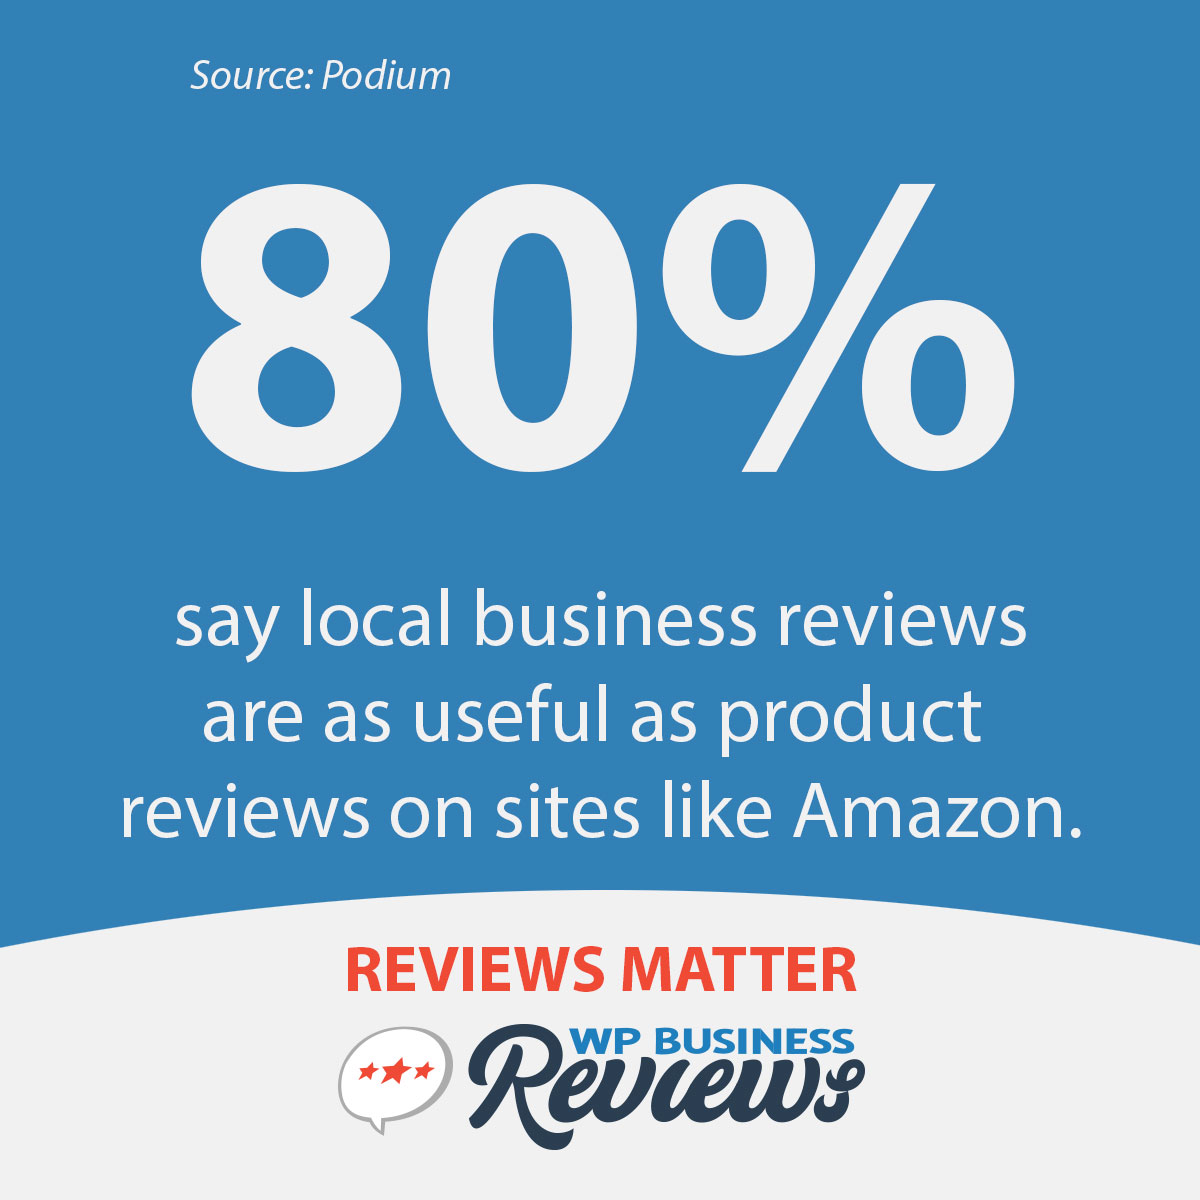 80% of people find local business reviews as useful as product reviews on sites like Amazon.